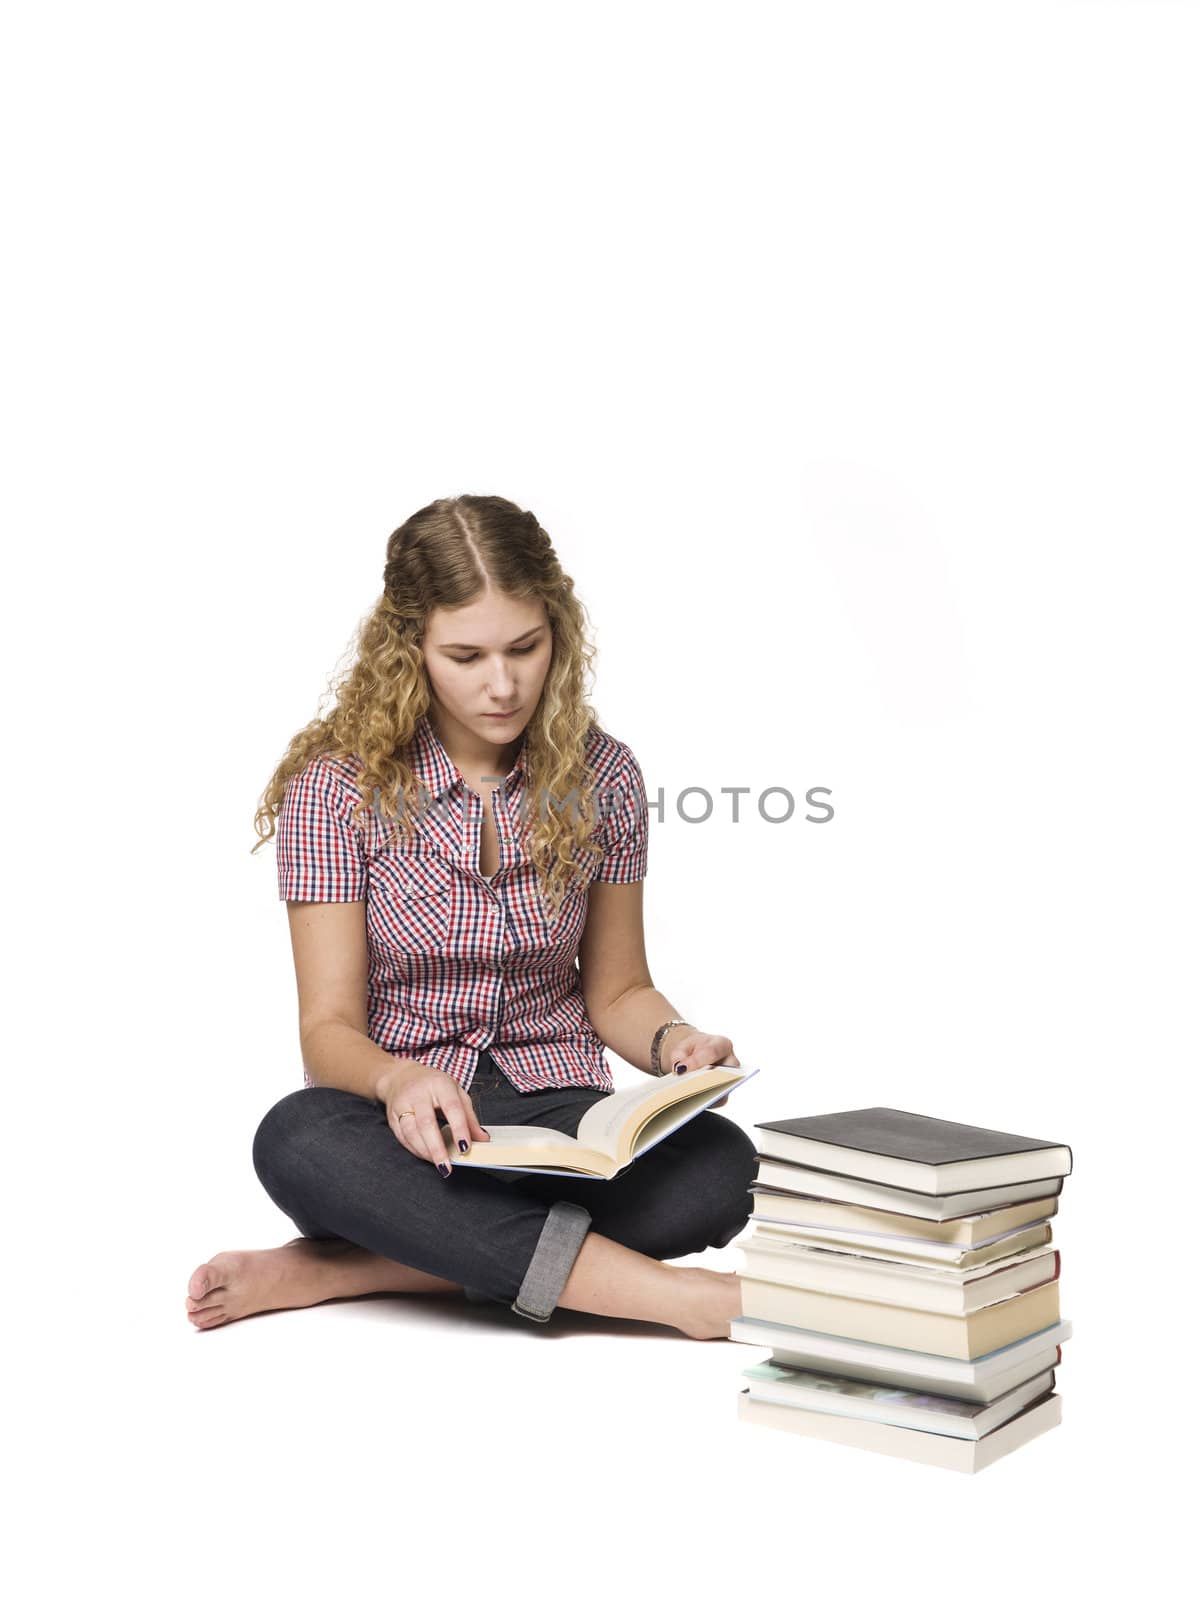 Woman siting on the floor reading